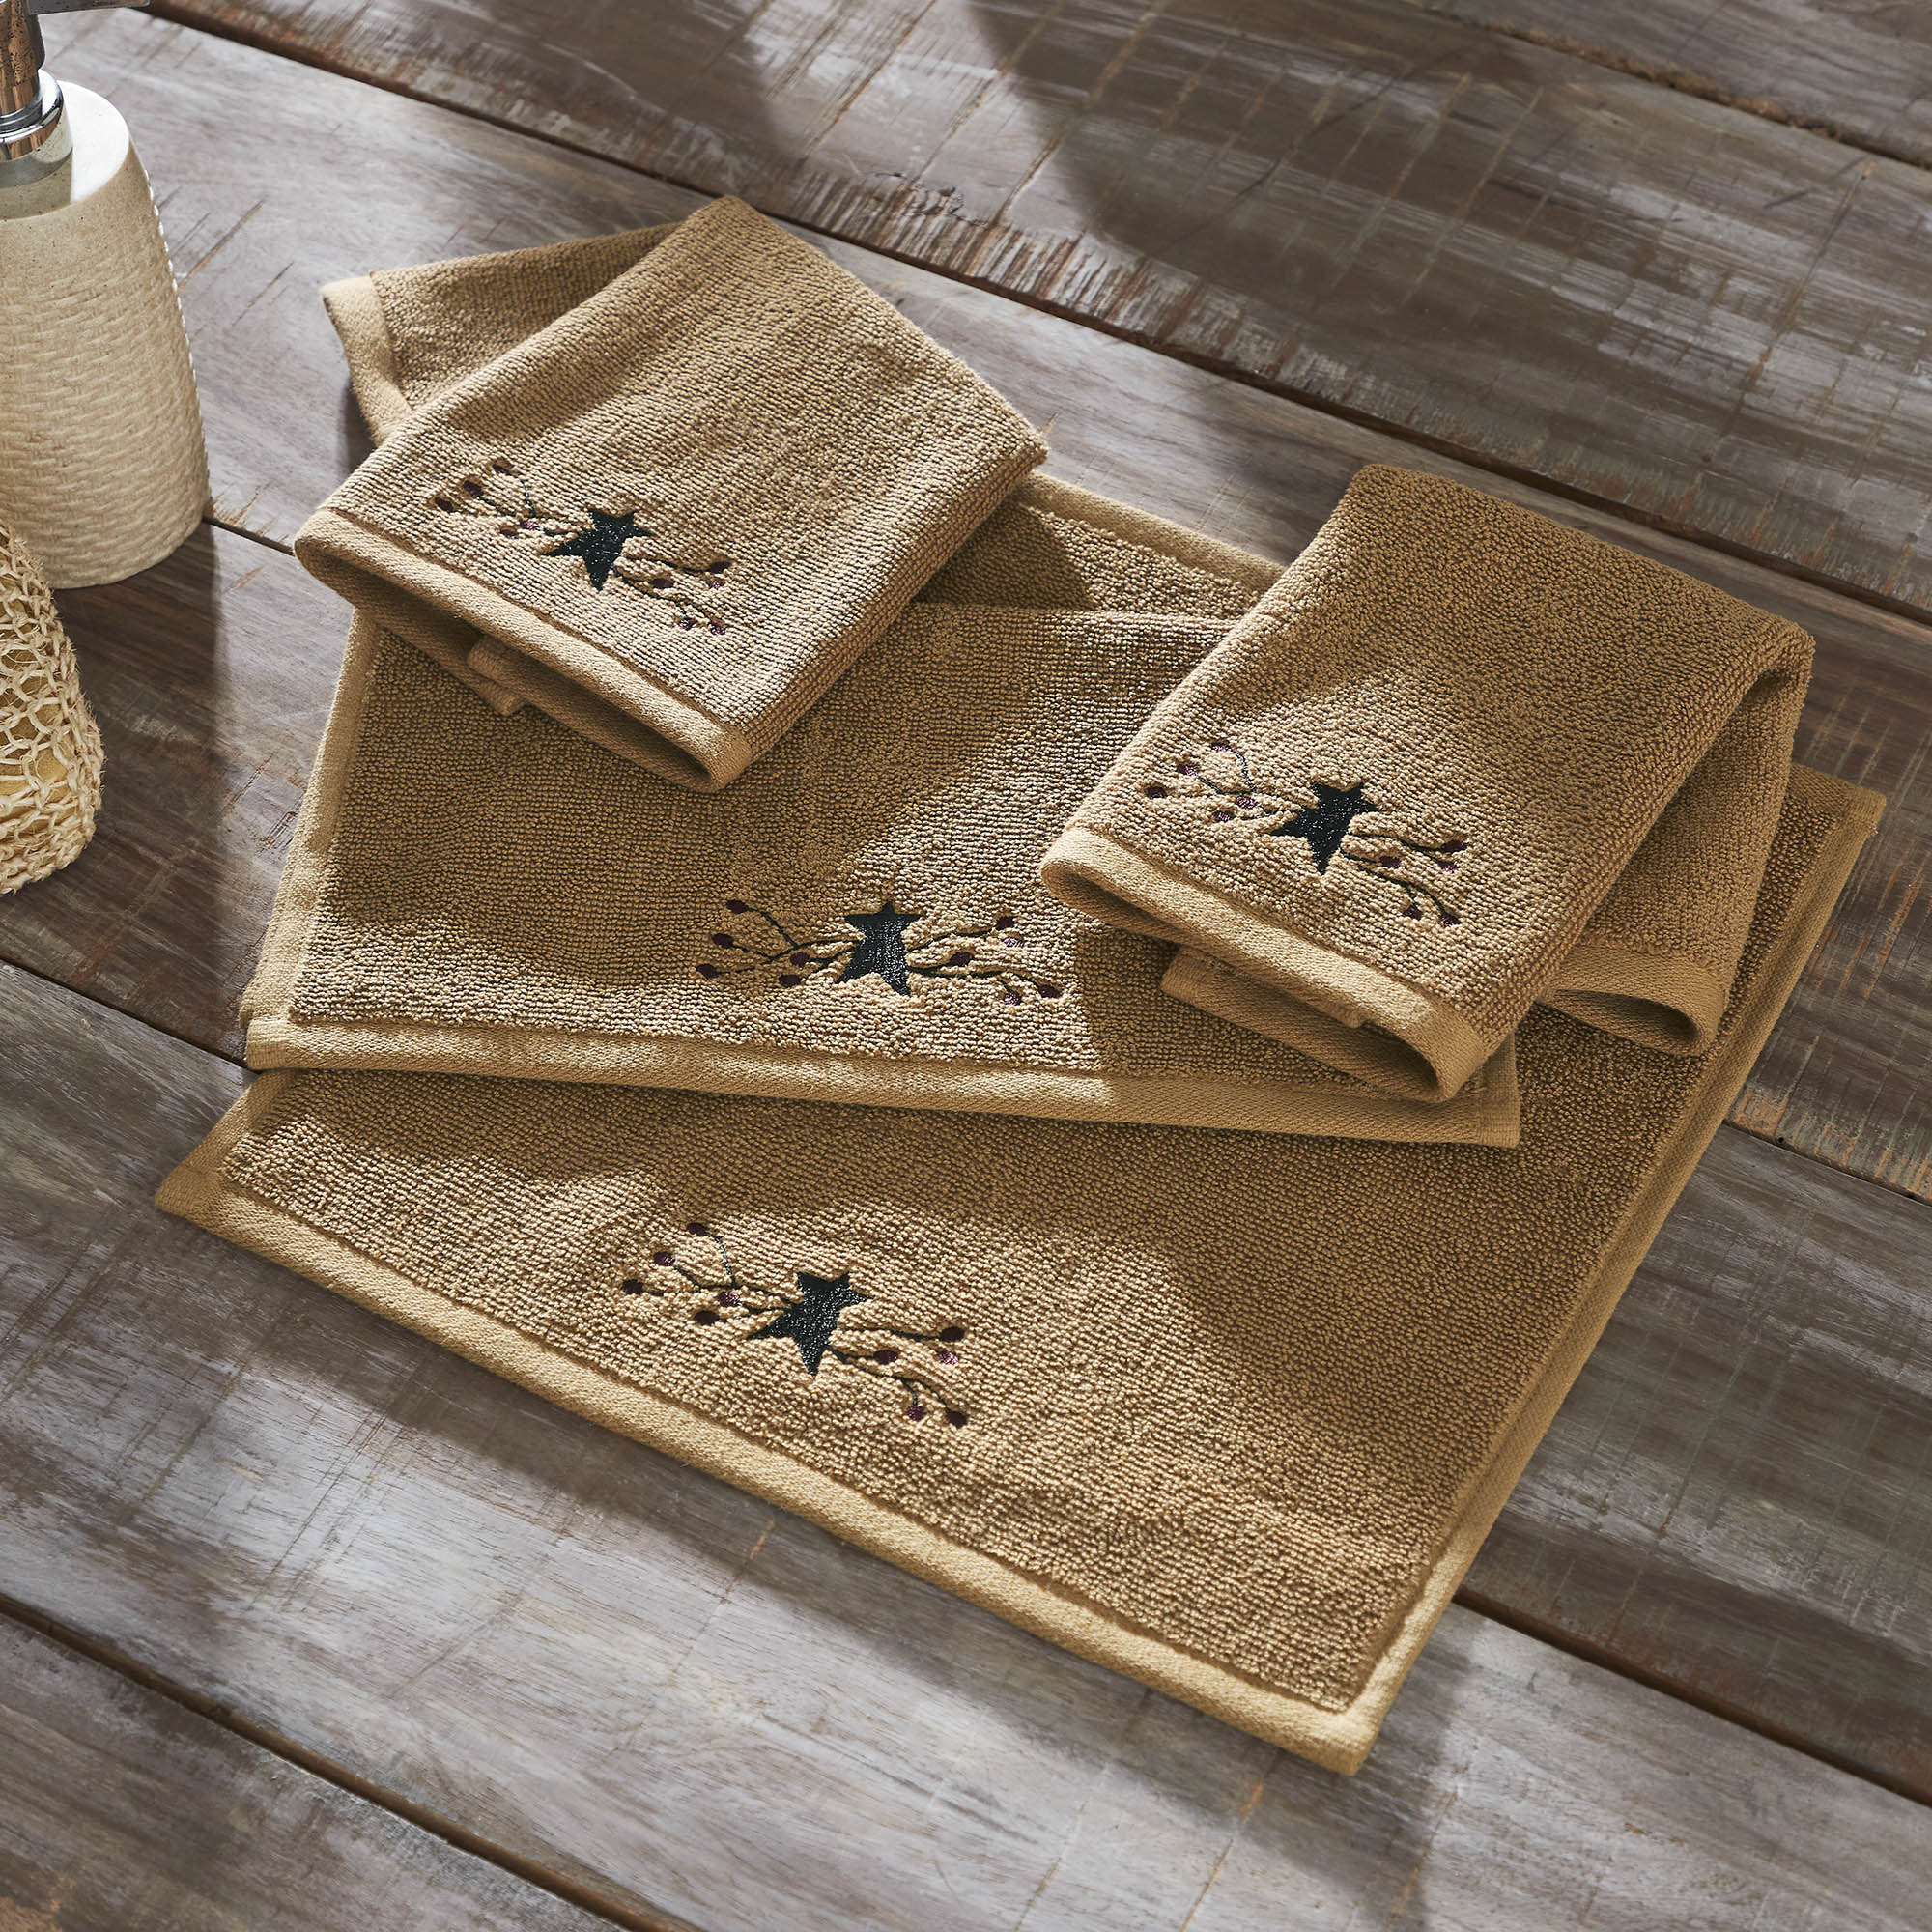 Pips and Vine Star Towels